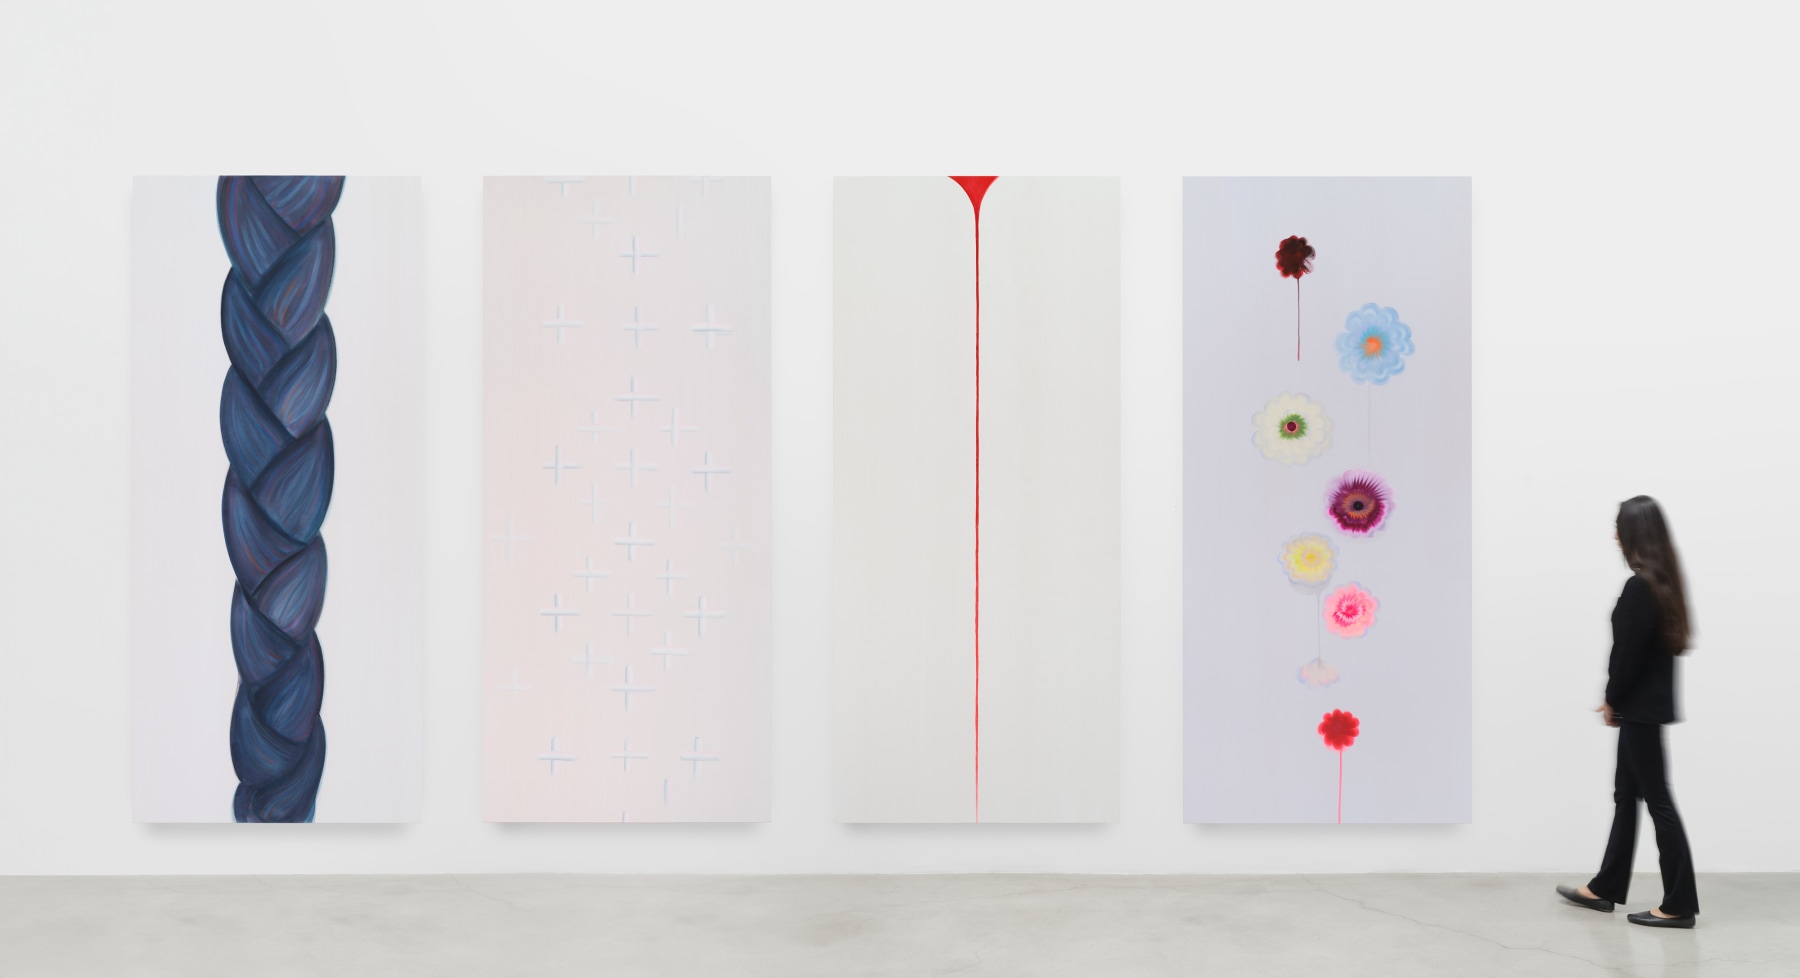 An installation view of Wanda Koop's &quot;Sleepwalking&quot; which is divided into four vertical panels. The left panel depicts a braid, the next panel is light pink with small white crosses, the next panel is white with a thin red bloodline running through the center, and the last panel has multi colored flowers floating across the surface